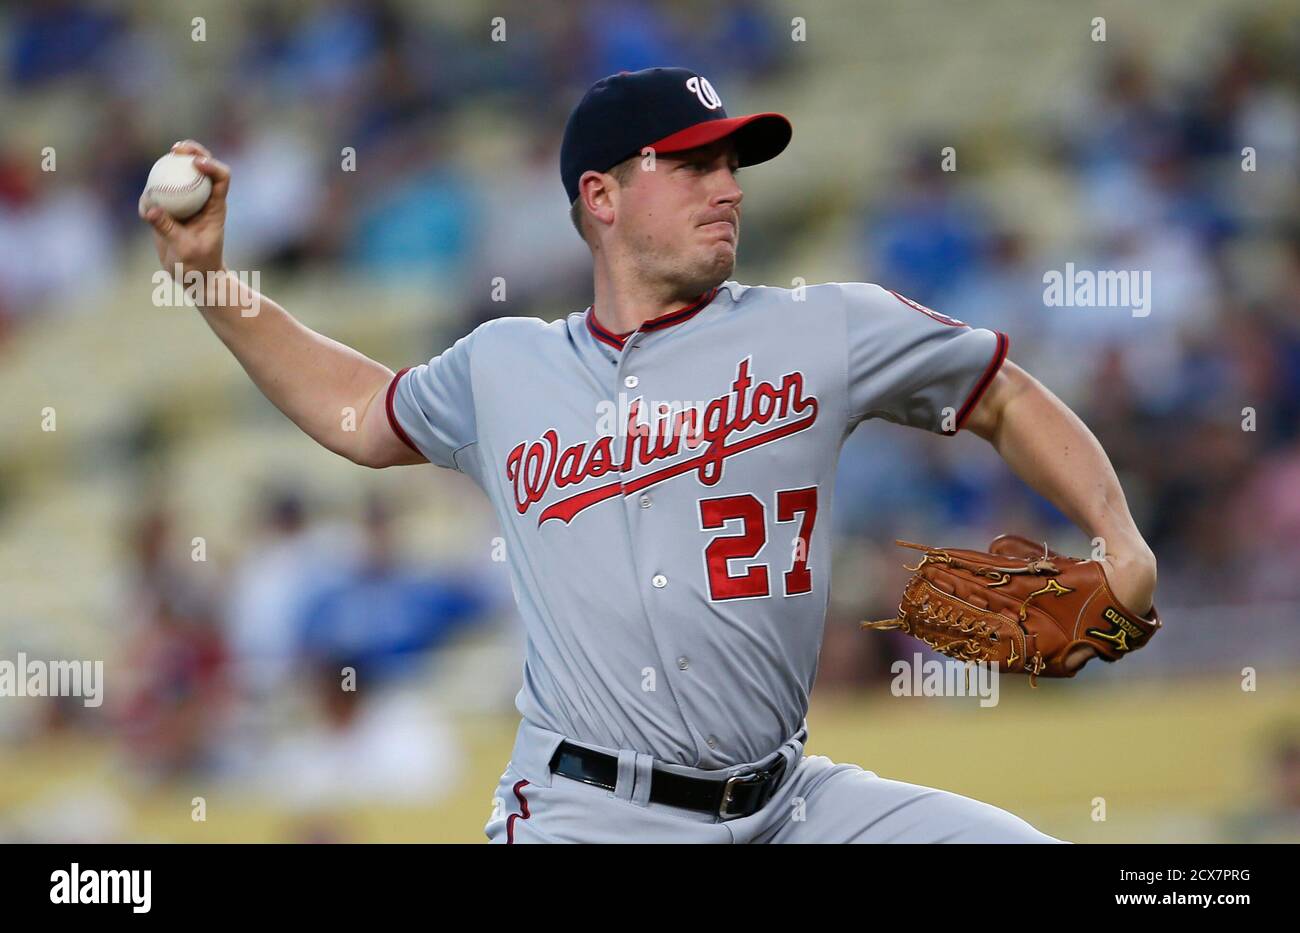 Washington Nationals starter Jordan Zimmermann pitches against the Los Angeles Dodgers during the first inning of their MLB National League baseball game in Los Angeles, California May 13, 2013. REUTERS/Lucy Nicholson (UNITED STATES - Tags: SPORT BASEBALL) Stock Photo